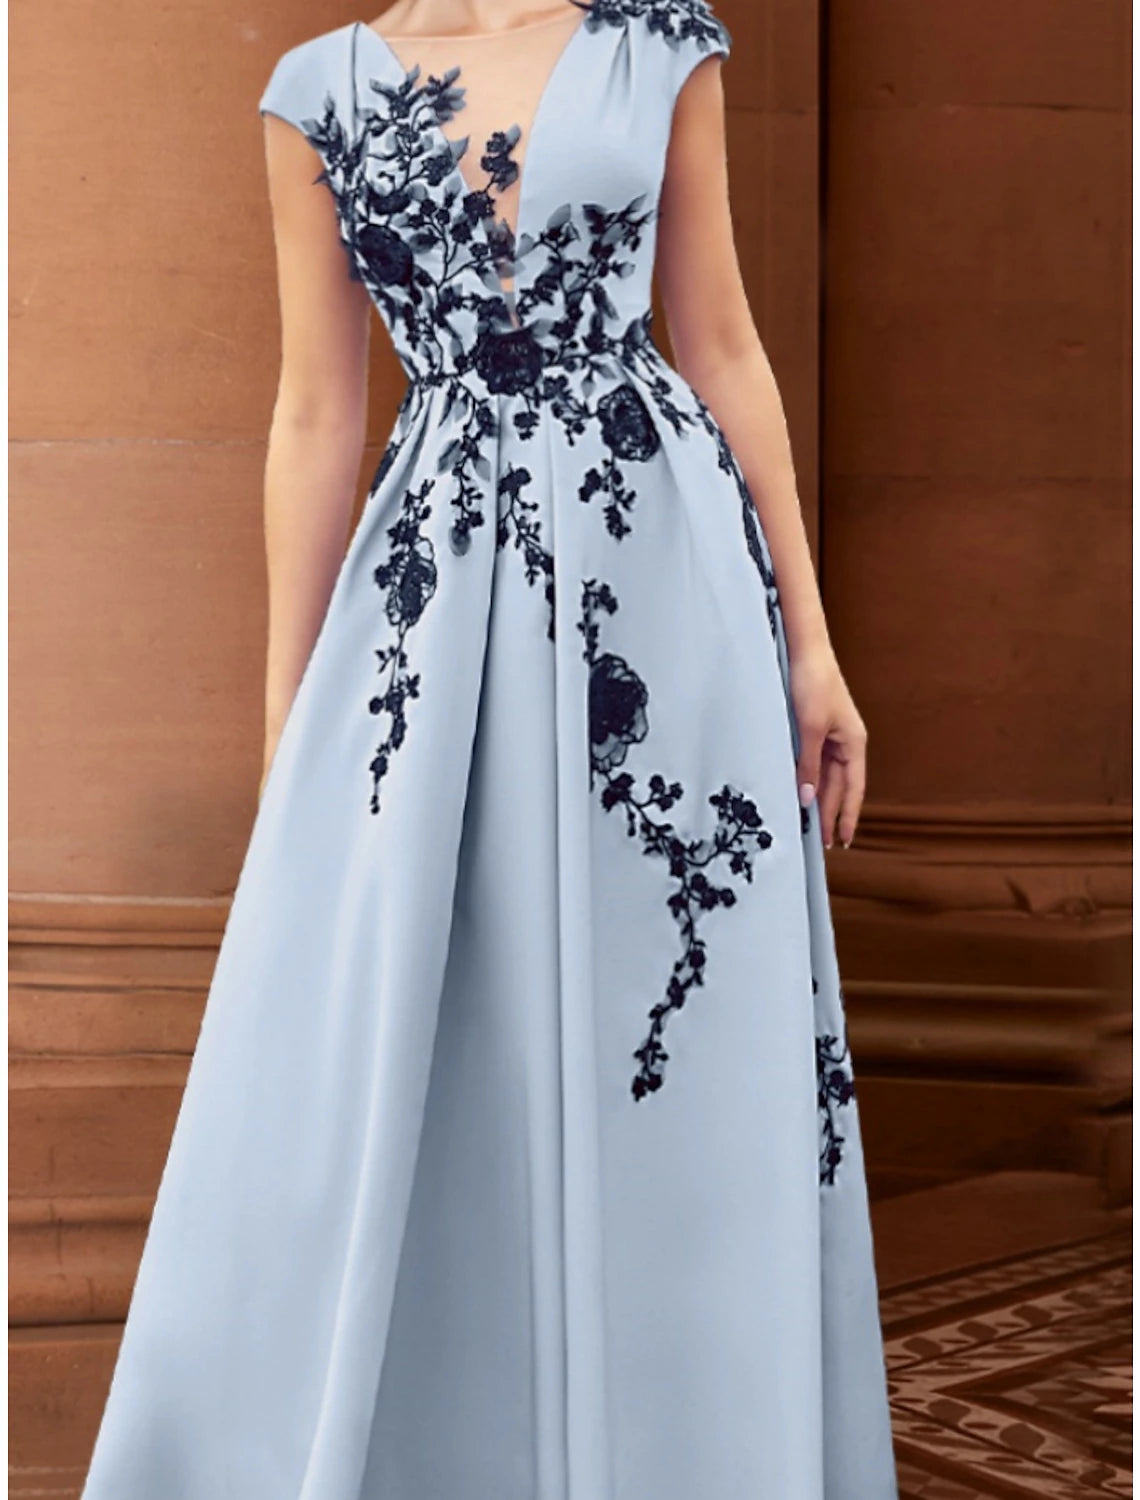 A-Line Mother of the Bride Dress Wedding Guest Elegant Illusion Neck Ankle Length Stretch Chiffon Cap Sleeve with Appliques Ruching